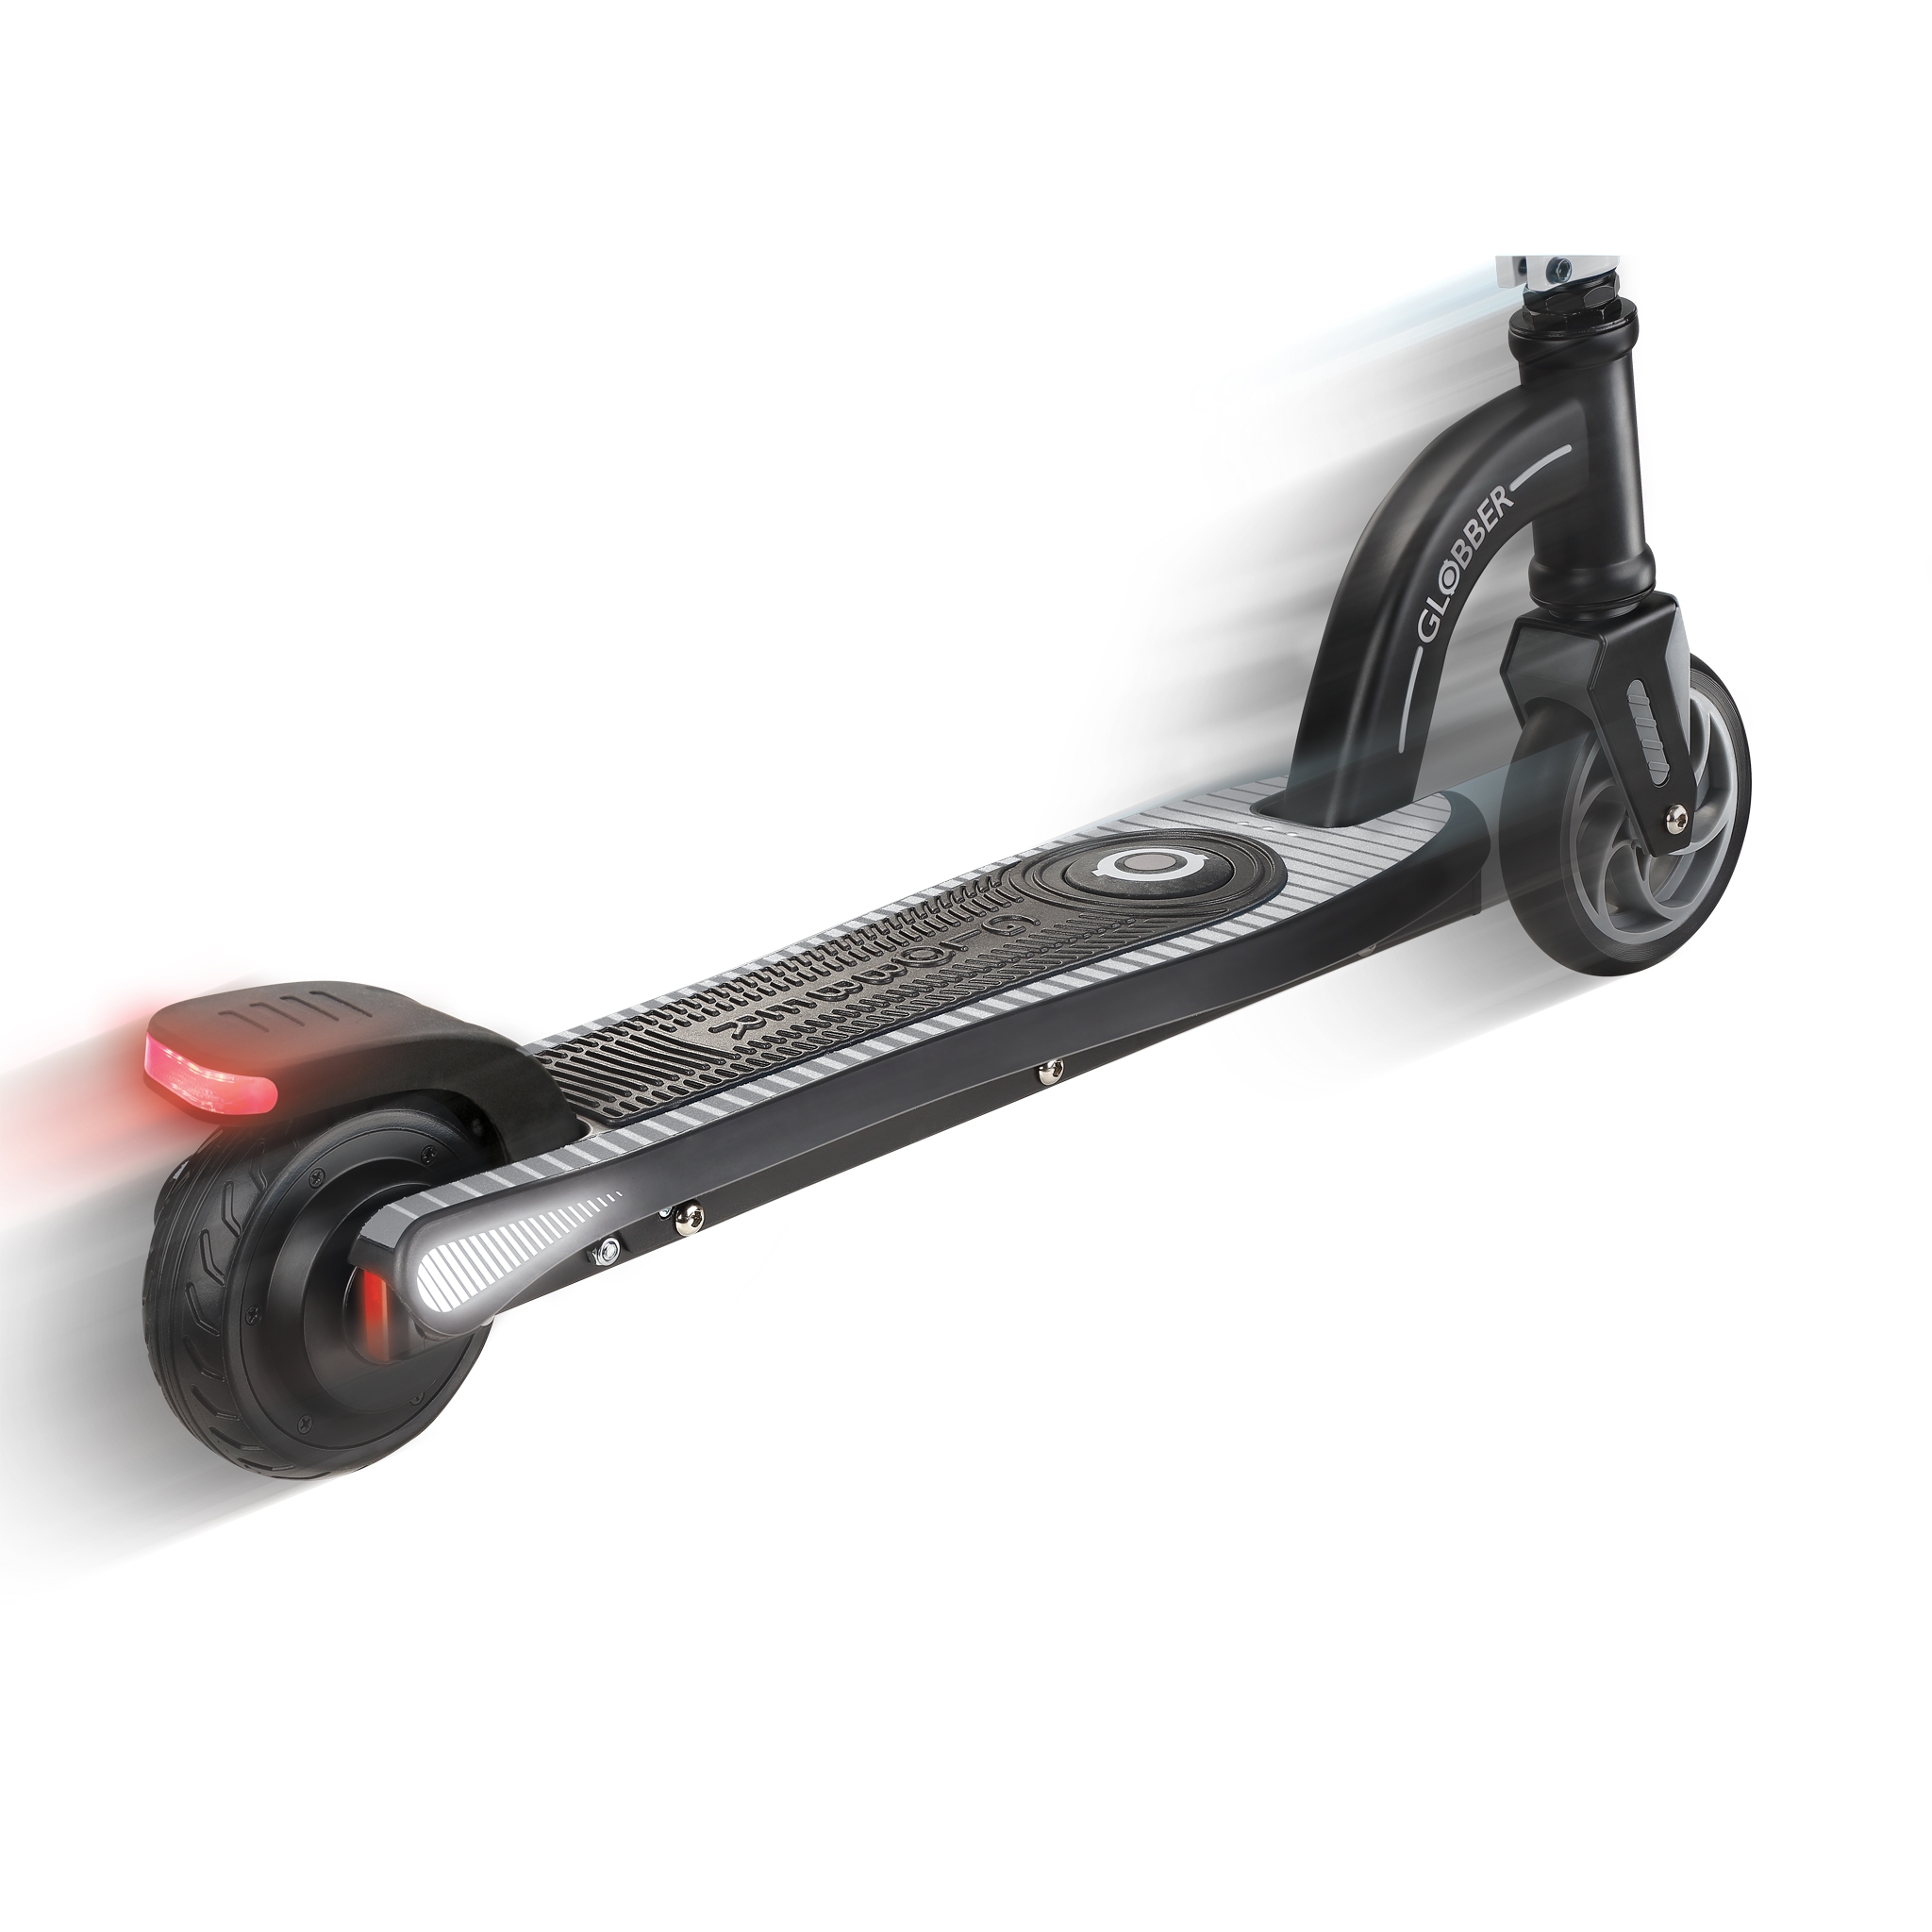 Globber-ONE-K-E-MOTION-10-electric-scooter-for-kids-aluminium-scooter-deck-with-accelerator-pressure-sensor 1